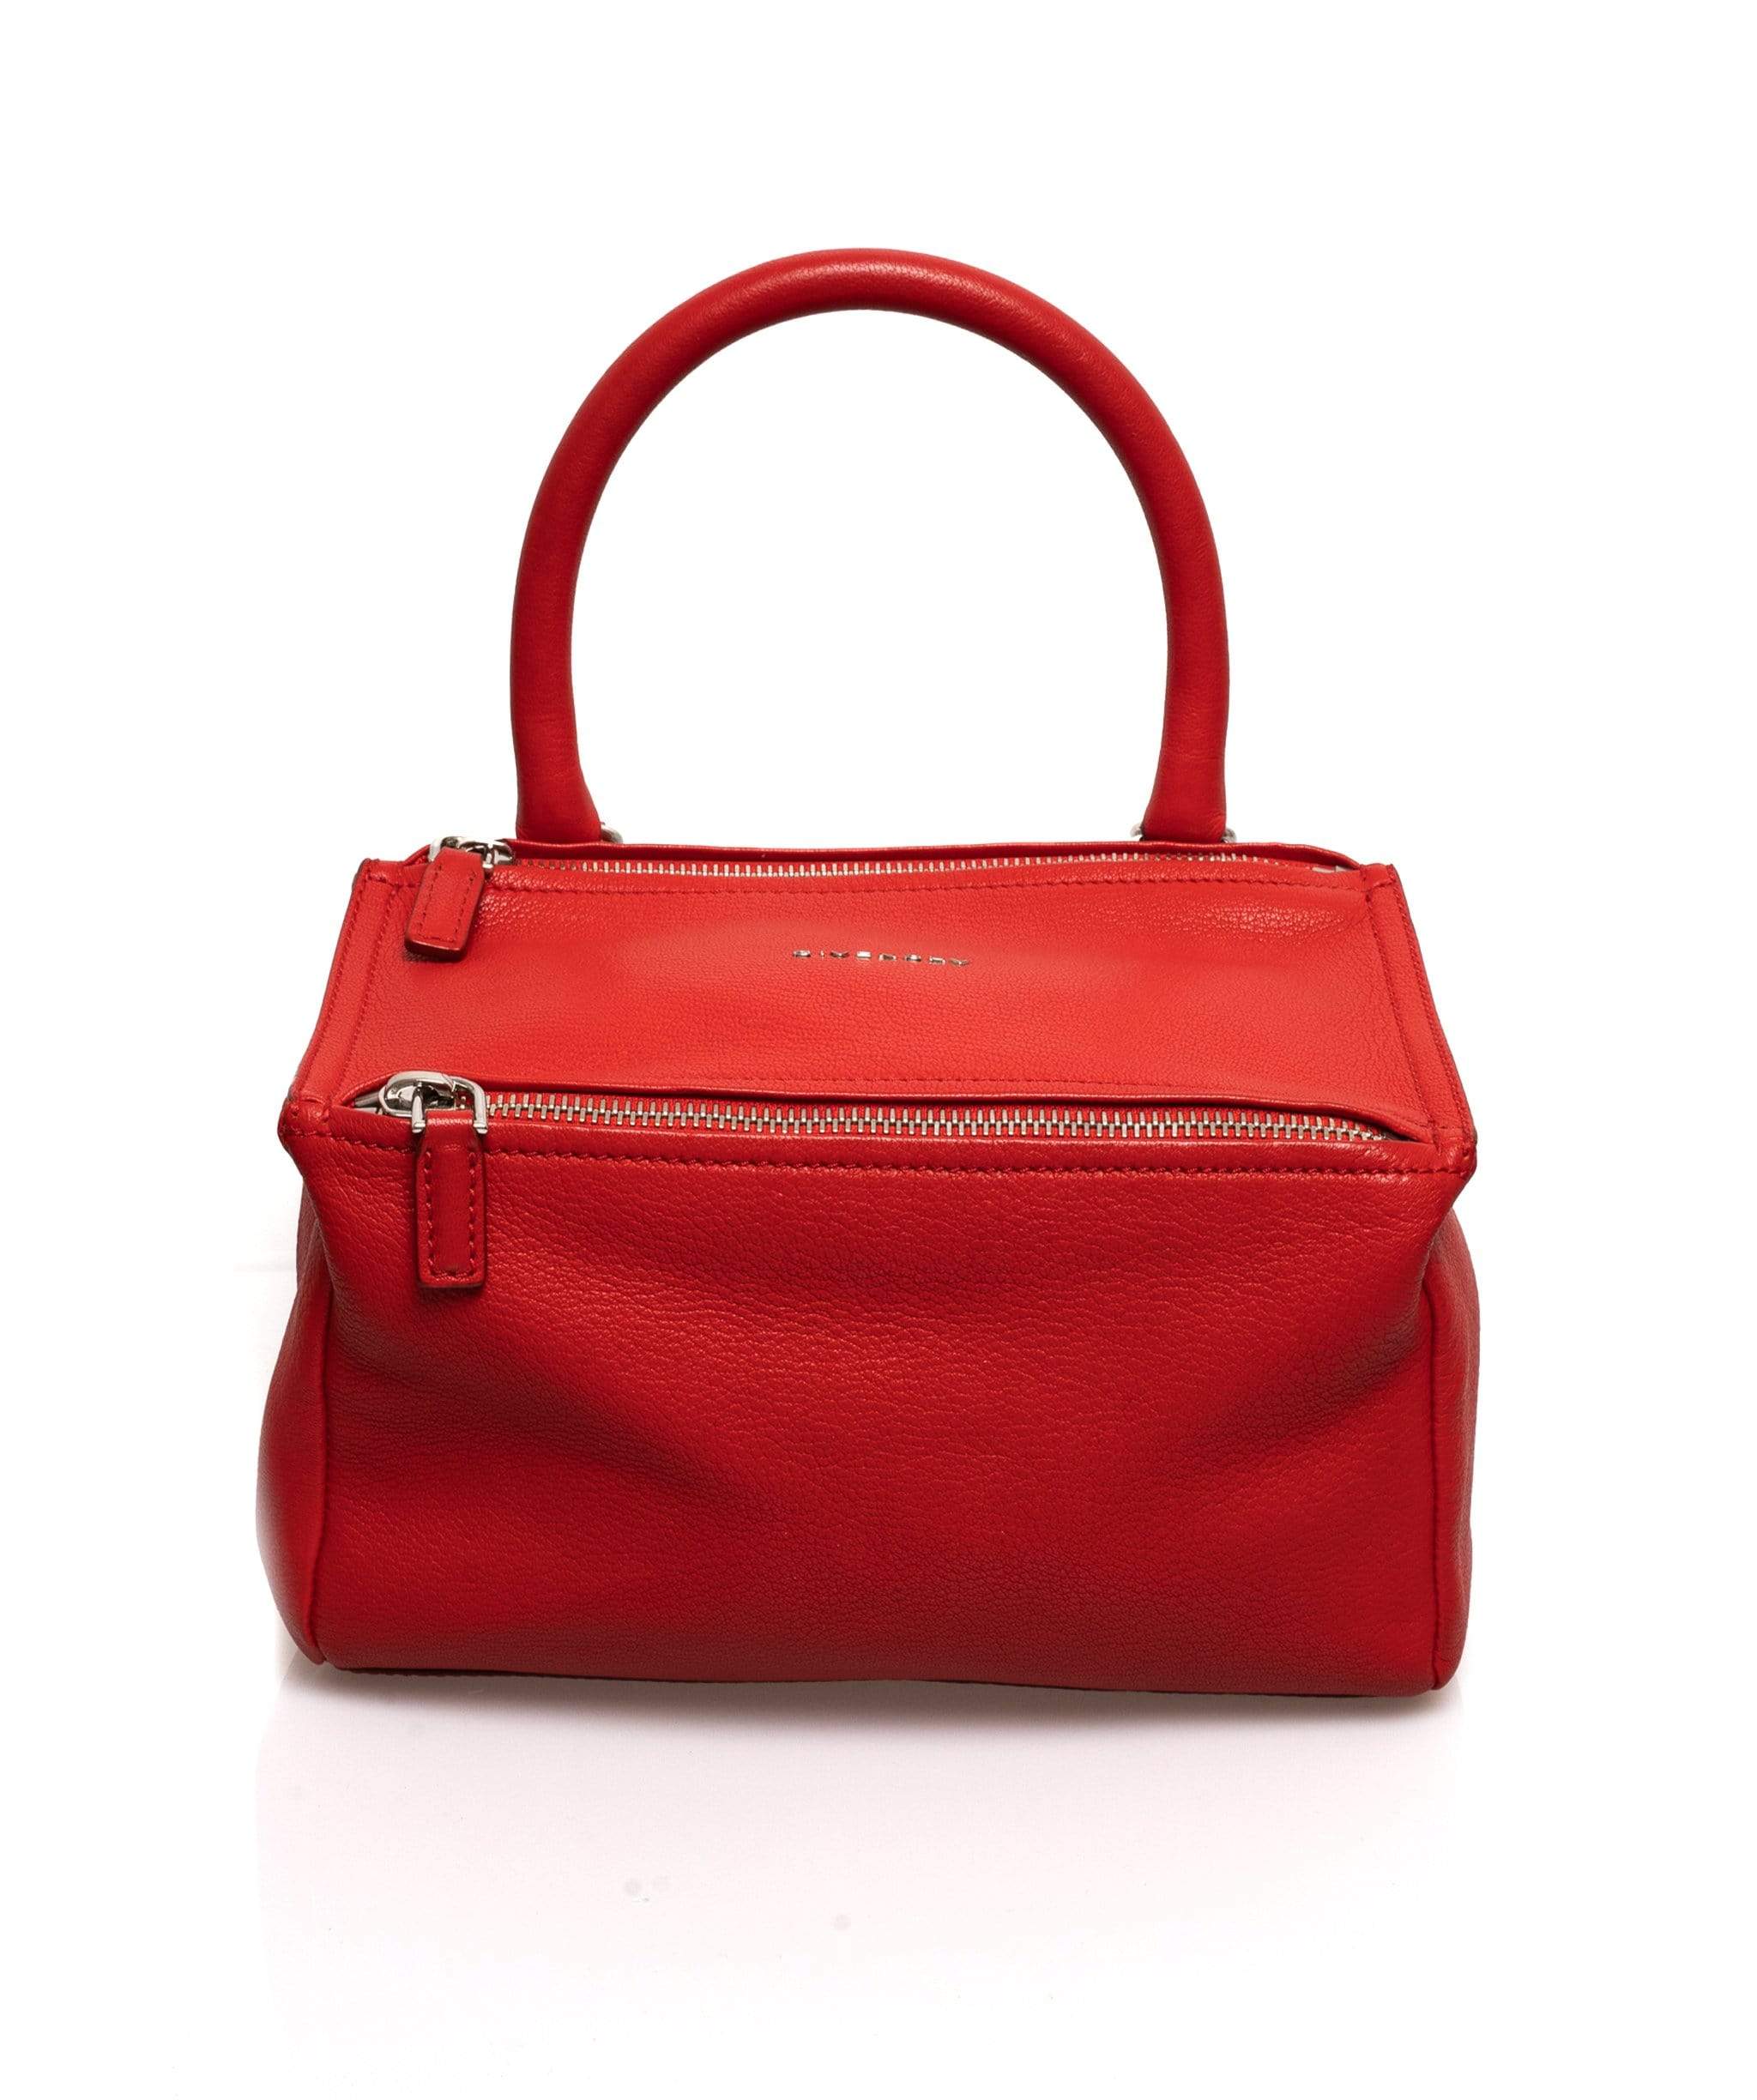 Givenchy Givenchy Pandora Red Leather Bag - ADL1226